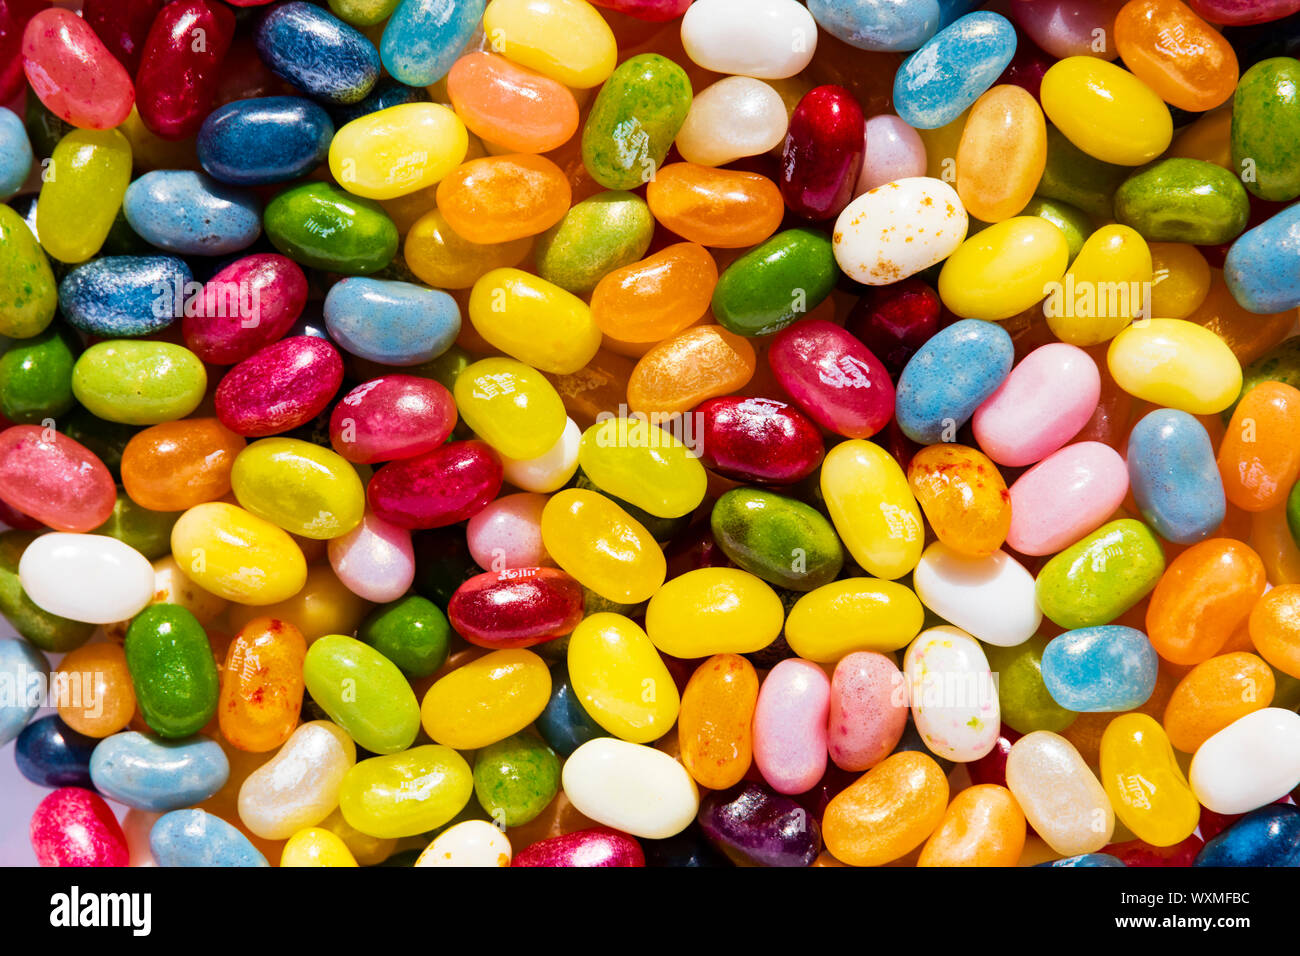 Multi coloured jelly belly beans. Stock Photo